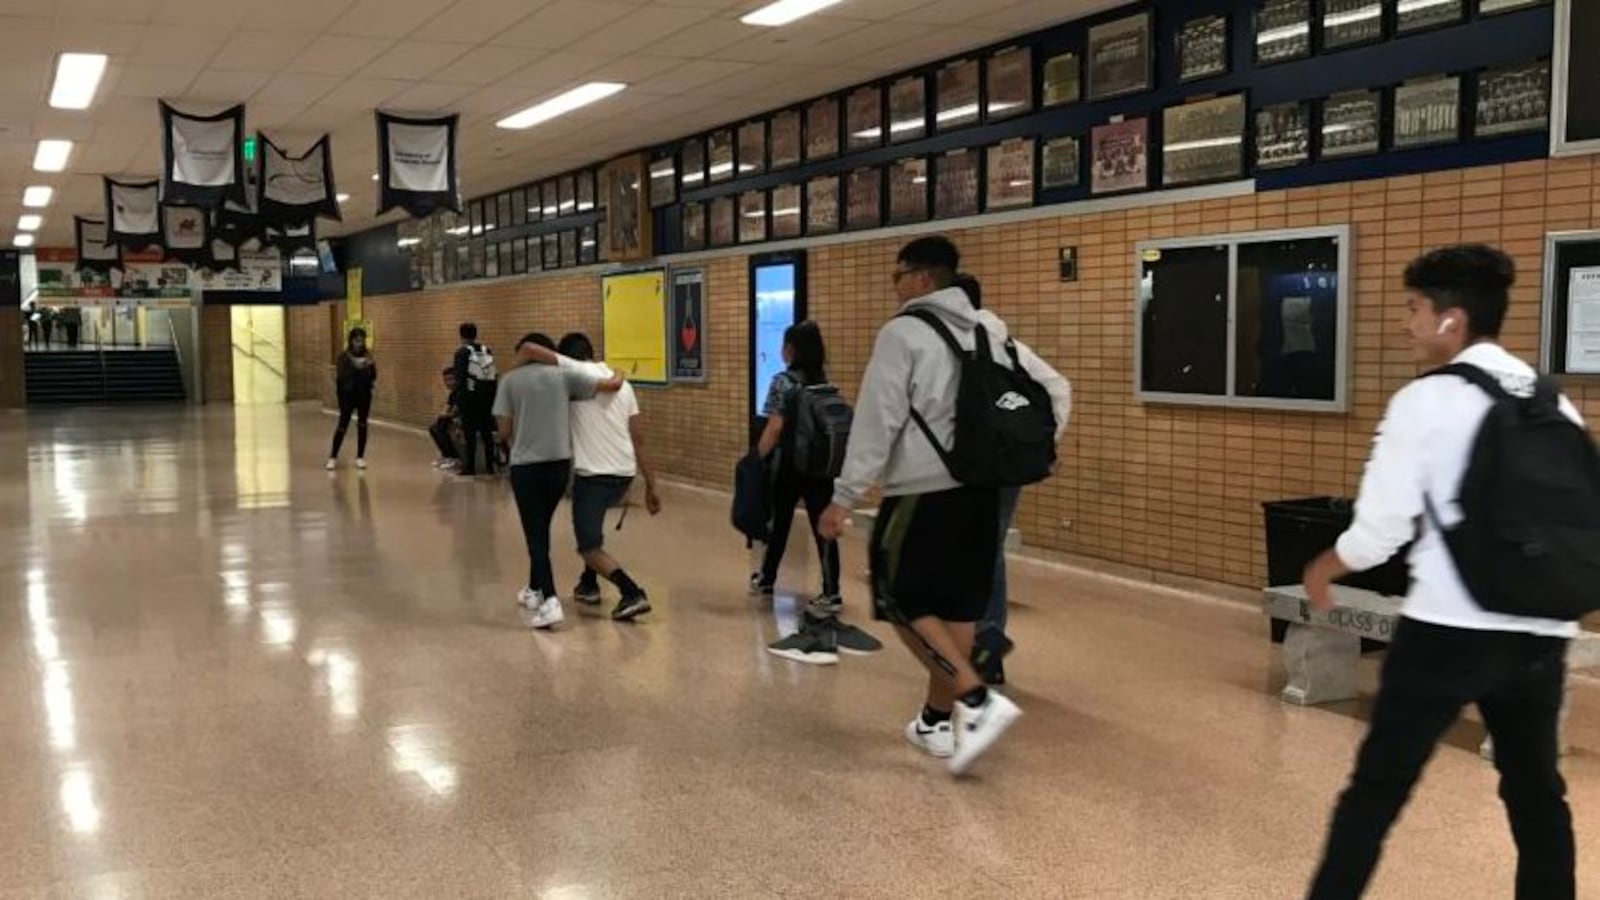 Students walk down the hallway at Denver's Abraham Lincoln High School in August 2019.